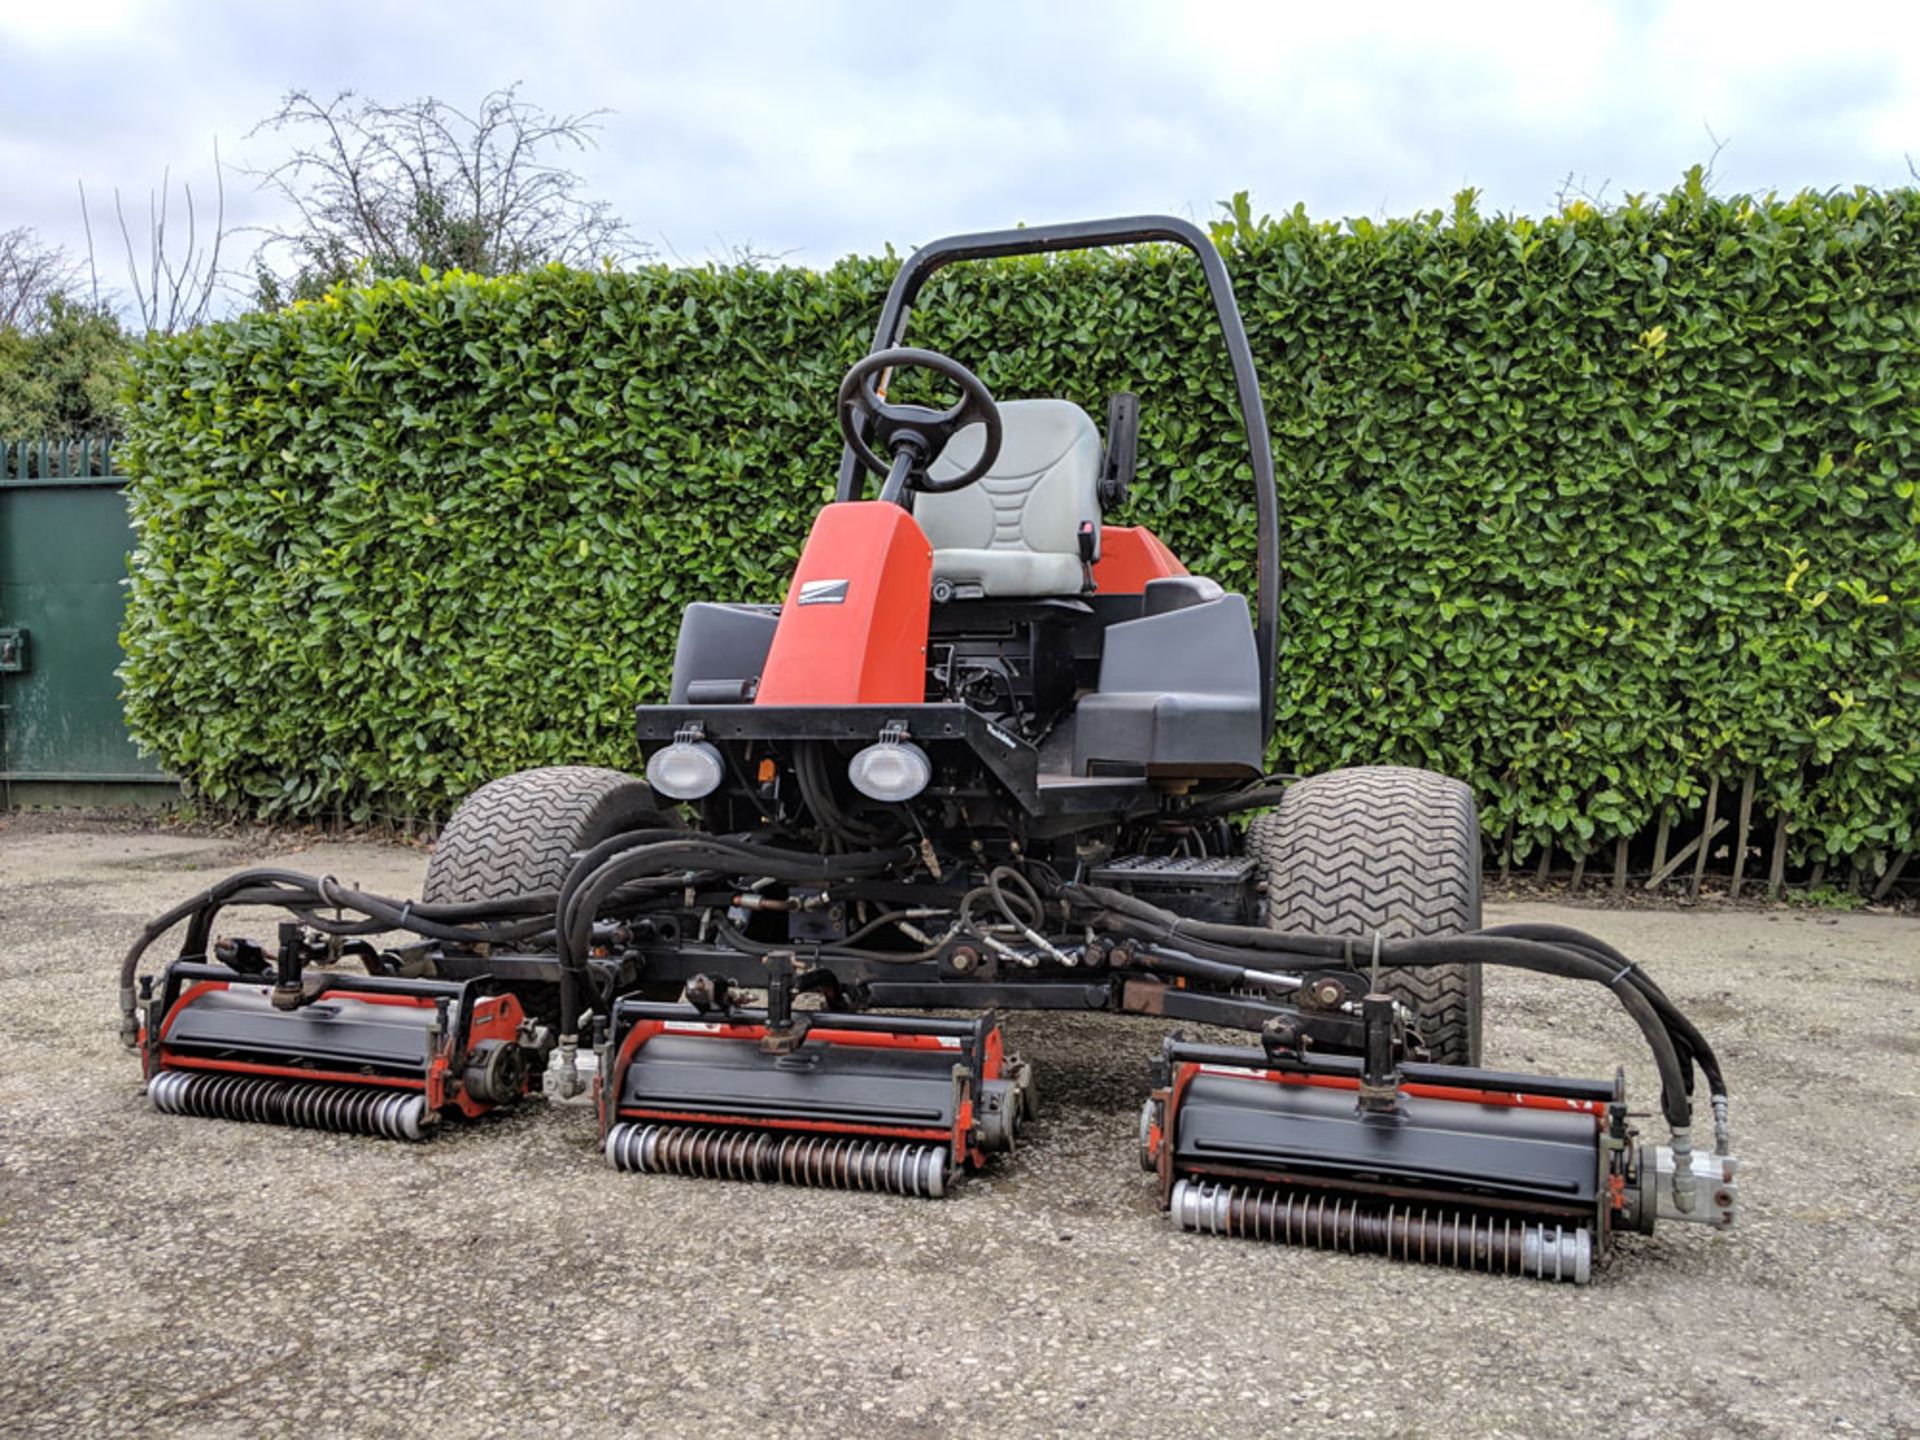 2007 Ransomes Jacobsen LF3800 4WD Cylinder Mower